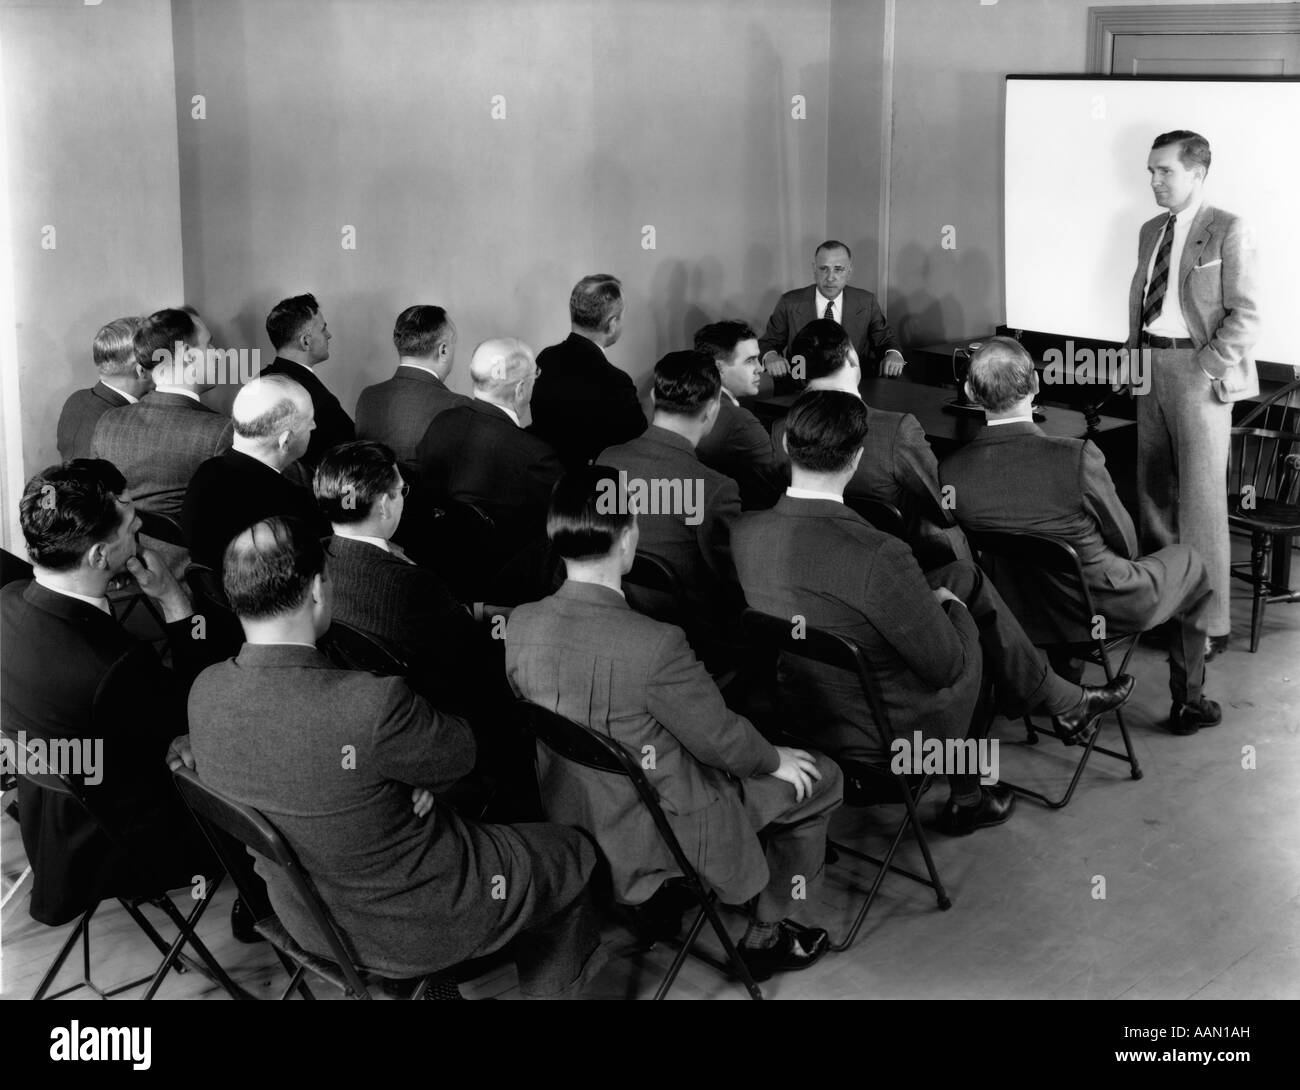 1940s EXECUTIVES IN ROWS OF FOLDING CHAIRS AT MEETING WITH CHAIRMAN IN FRONT OF ROOM BANGING GAVEL ON TABLE Stock Photo